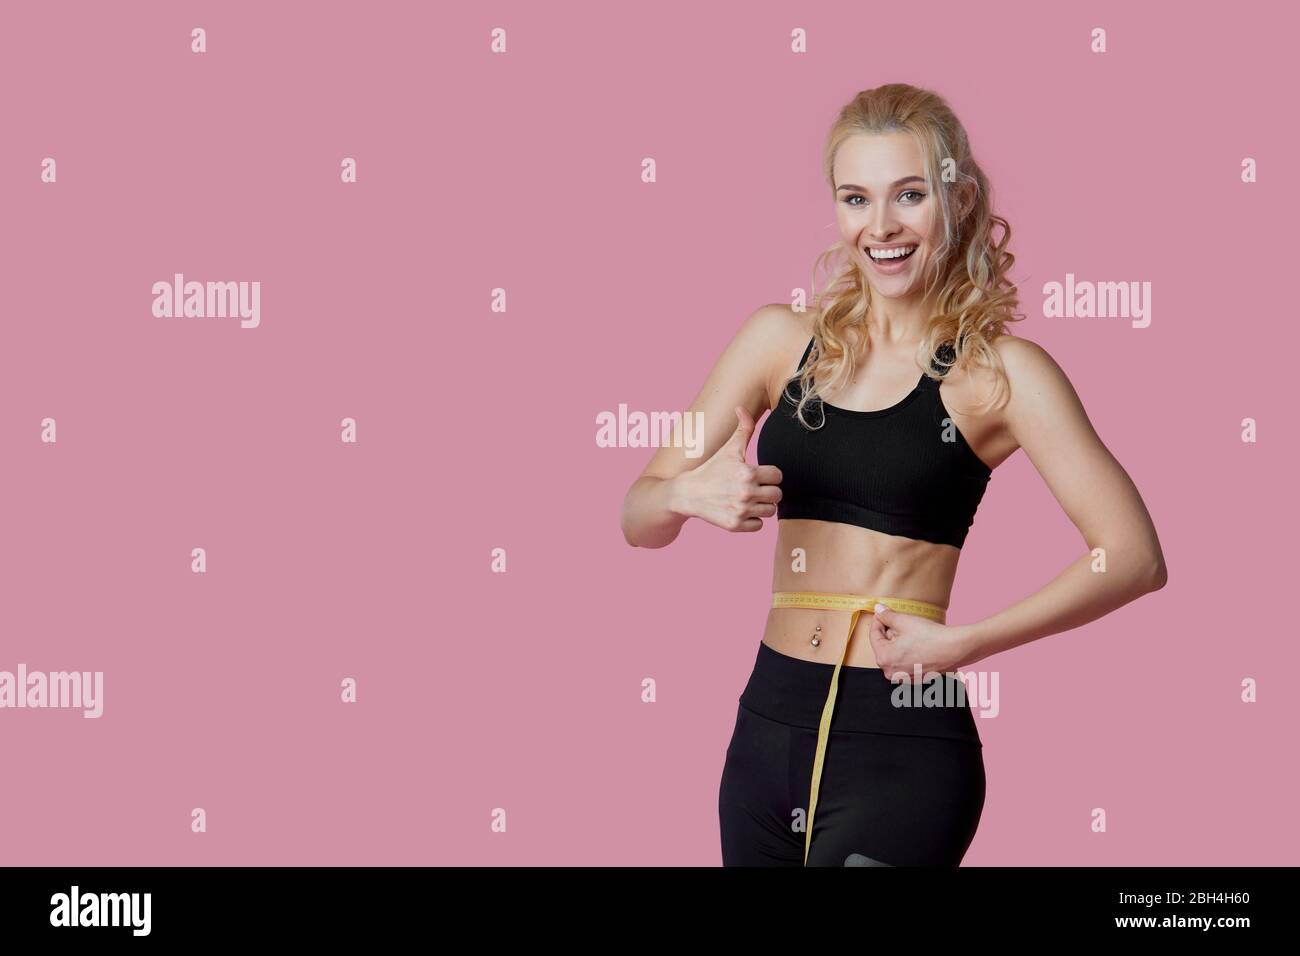 Fitness, workout, healthy lifestyle and diet concept - thin athletes women measure waist after exercise. Quarantine online training Stock Photo